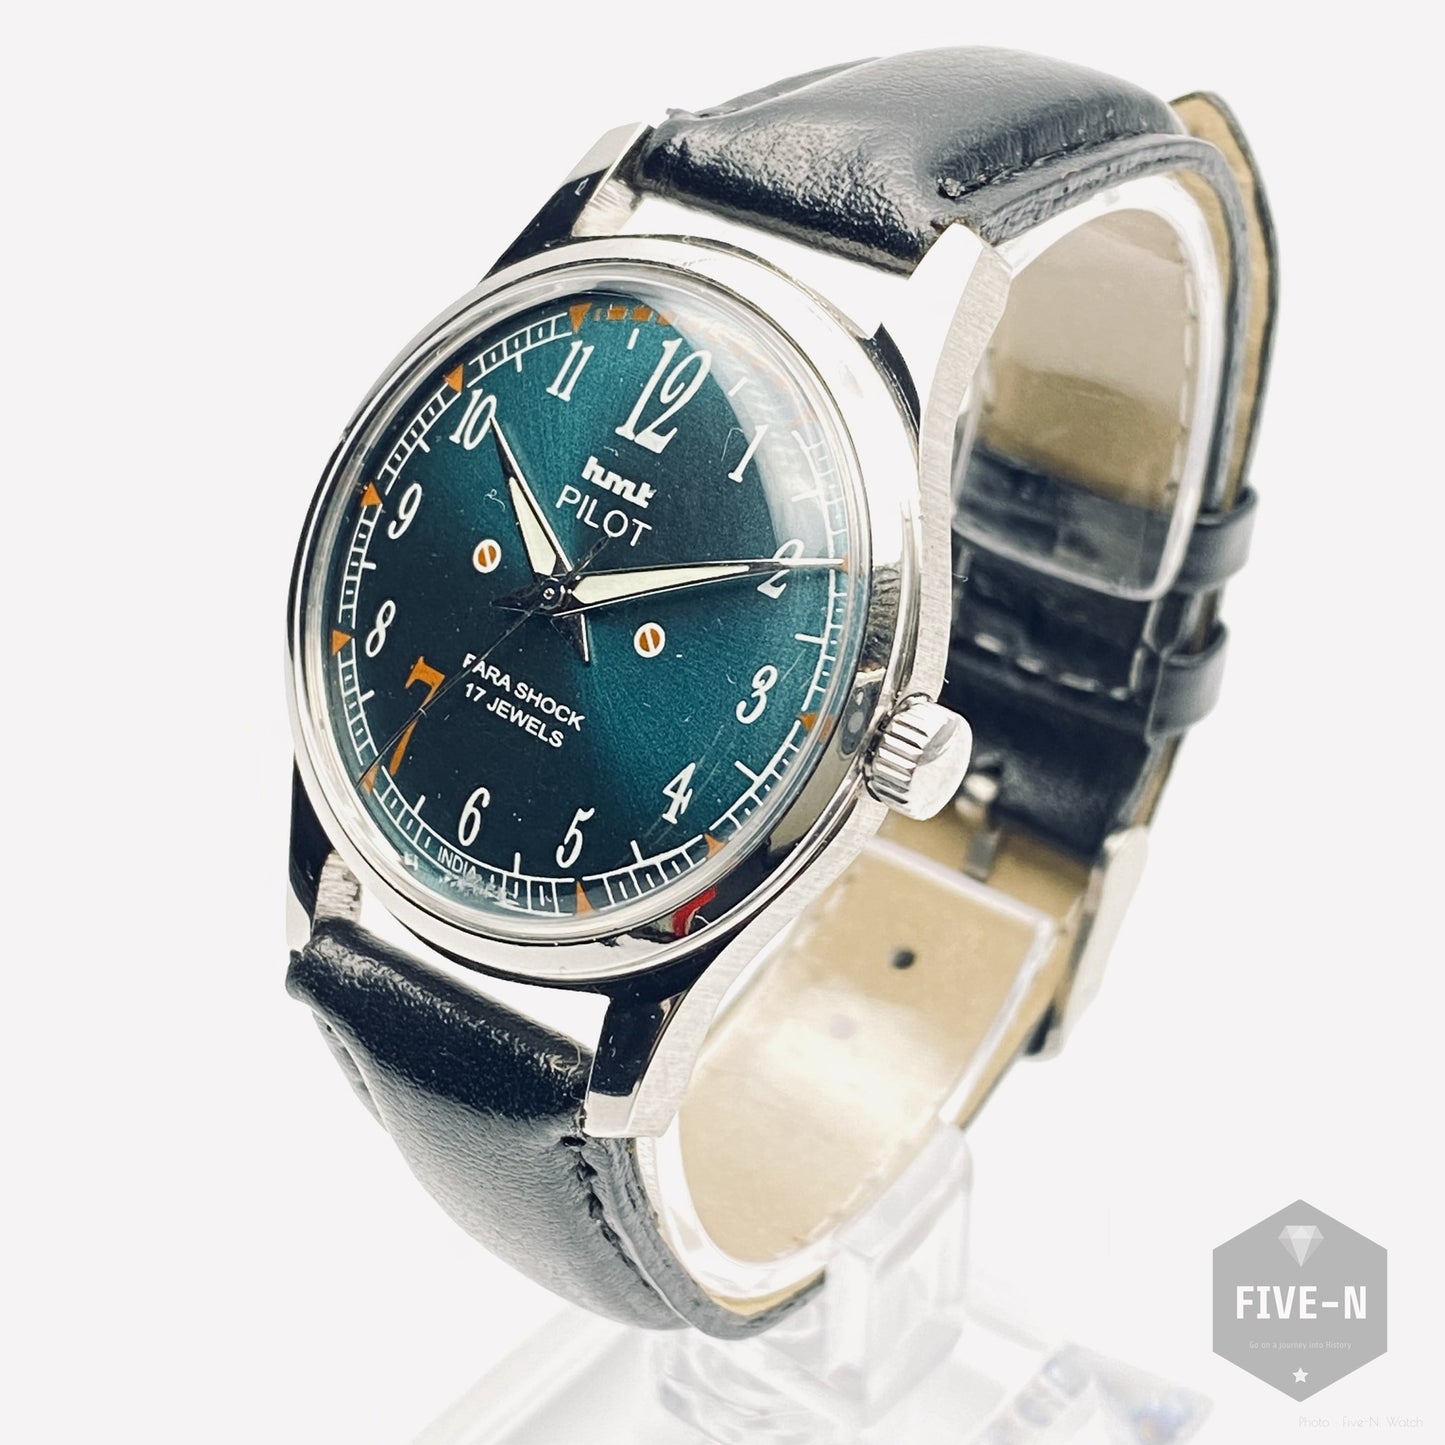 HMT Pilot レトロミリタリー緑 エイチ･エム･ティ･パイロット (Pre-Owned)